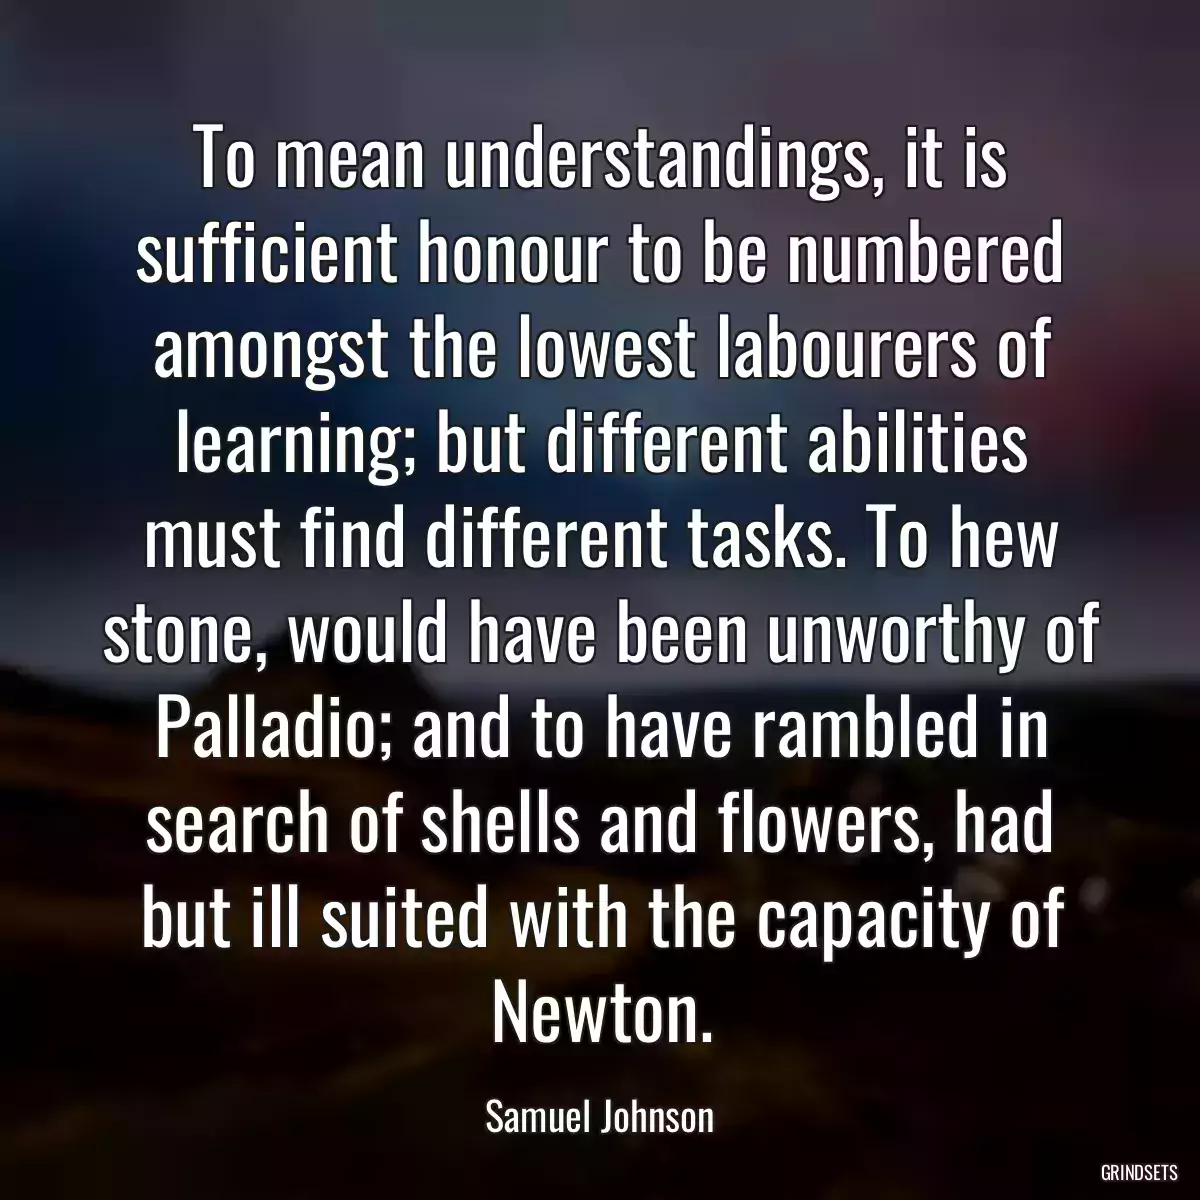 To mean understandings, it is sufficient honour to be numbered amongst the lowest labourers of learning; but different abilities must find different tasks. To hew stone, would have been unworthy of Palladio; and to have rambled in search of shells and flowers, had but ill suited with the capacity of Newton.